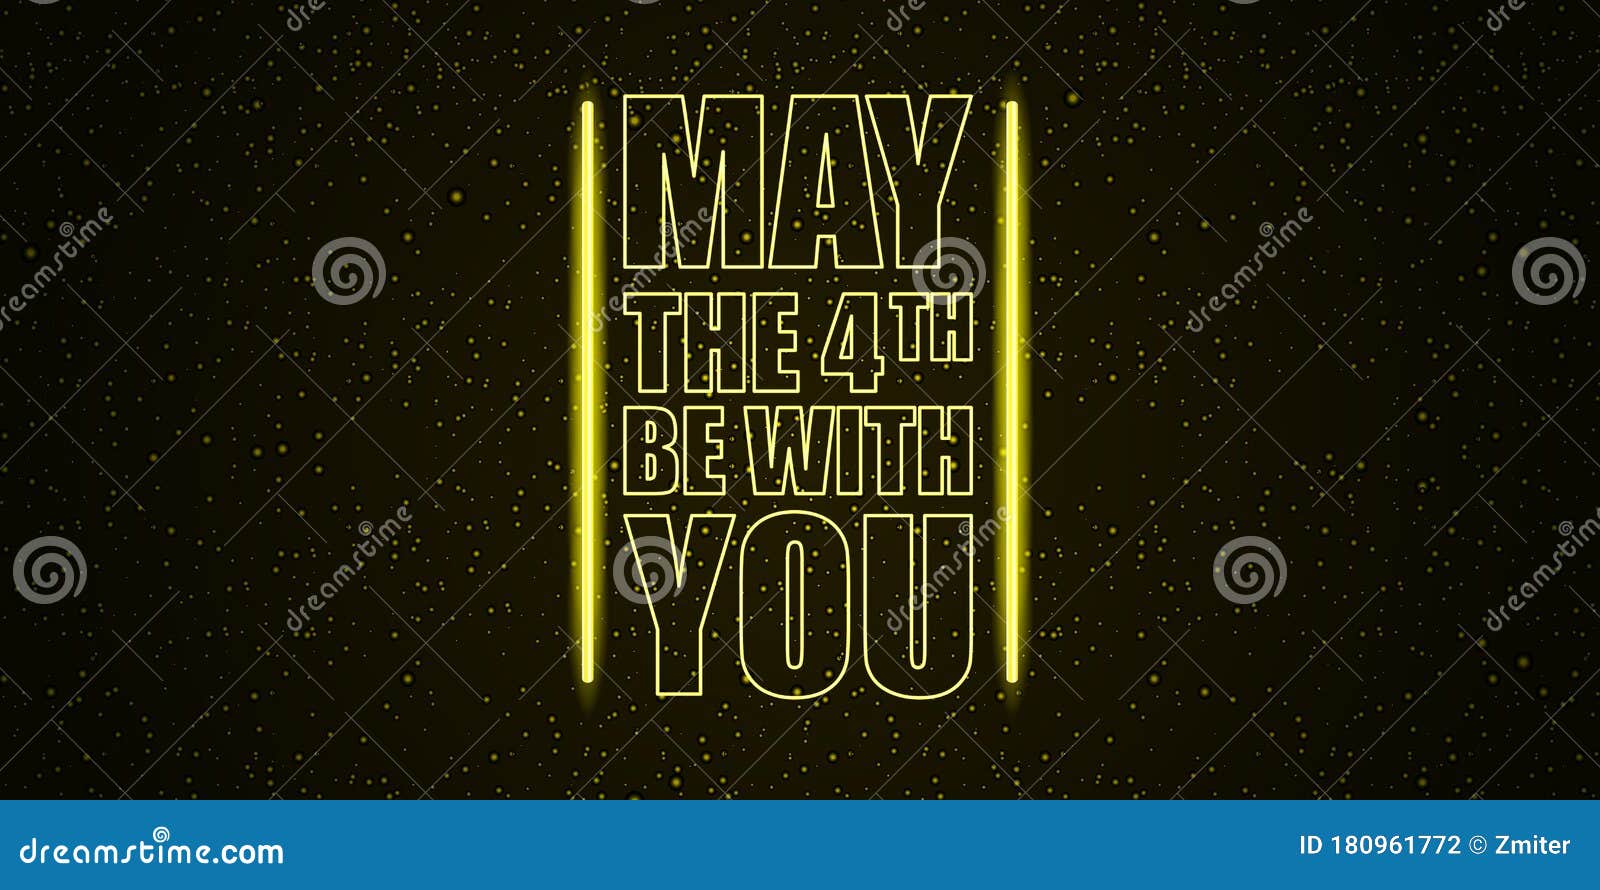 may the 4th be with you holiday greetings   with text on night space background with glowing stars